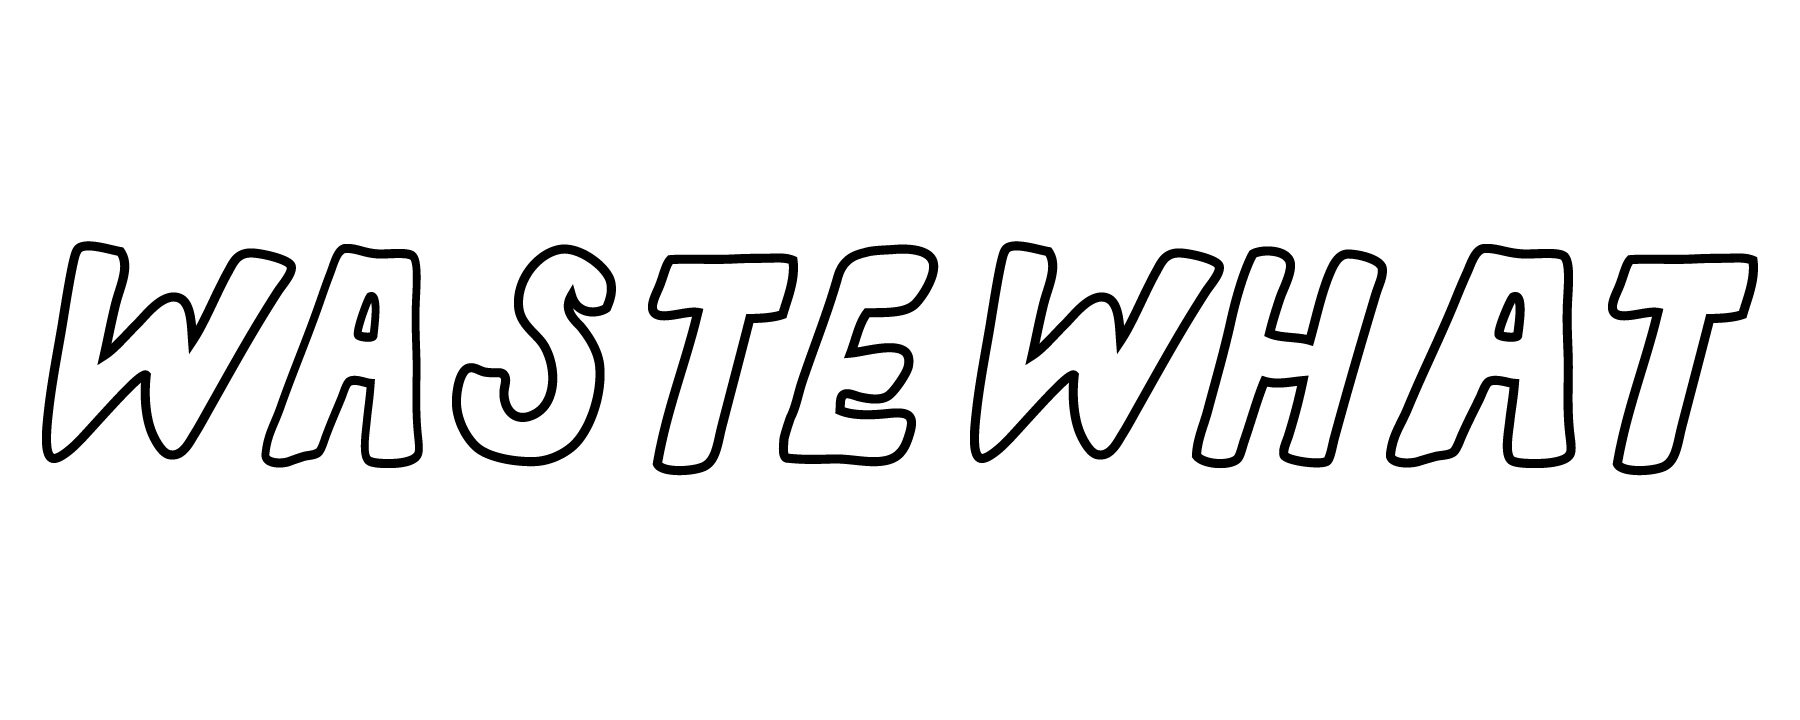 WasteWhat